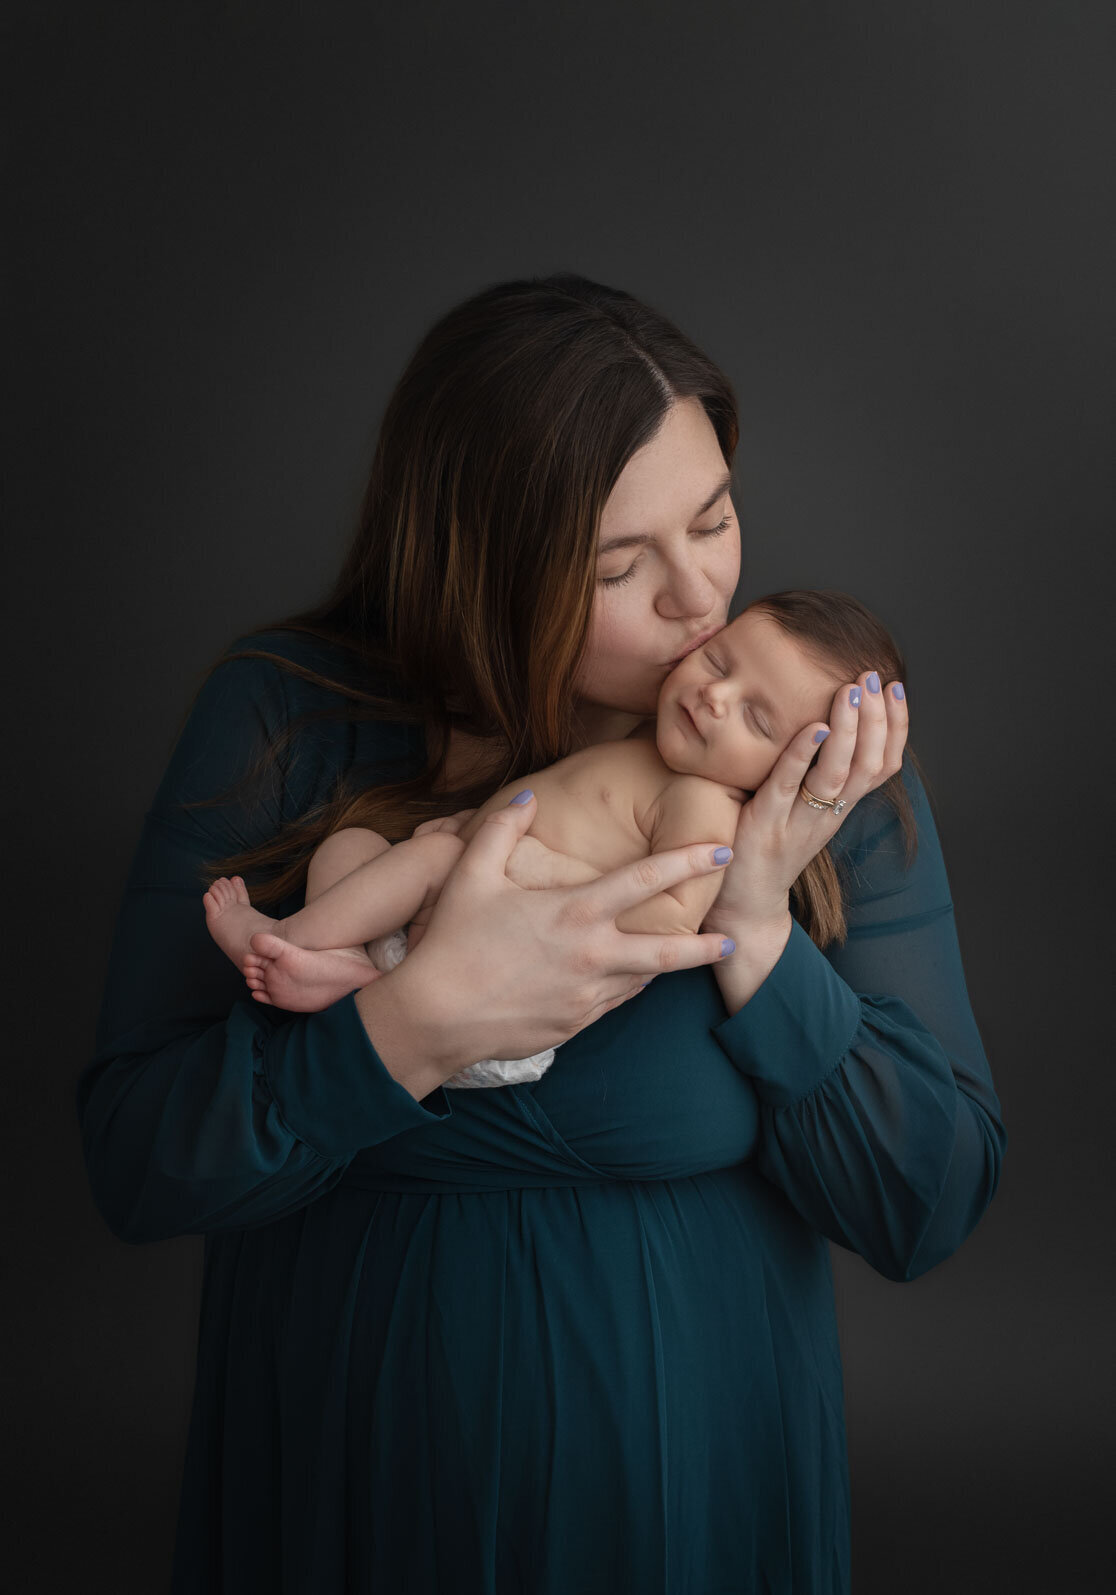 mom kissing her naked newborn on the cheek while wearing teal dress on gray background